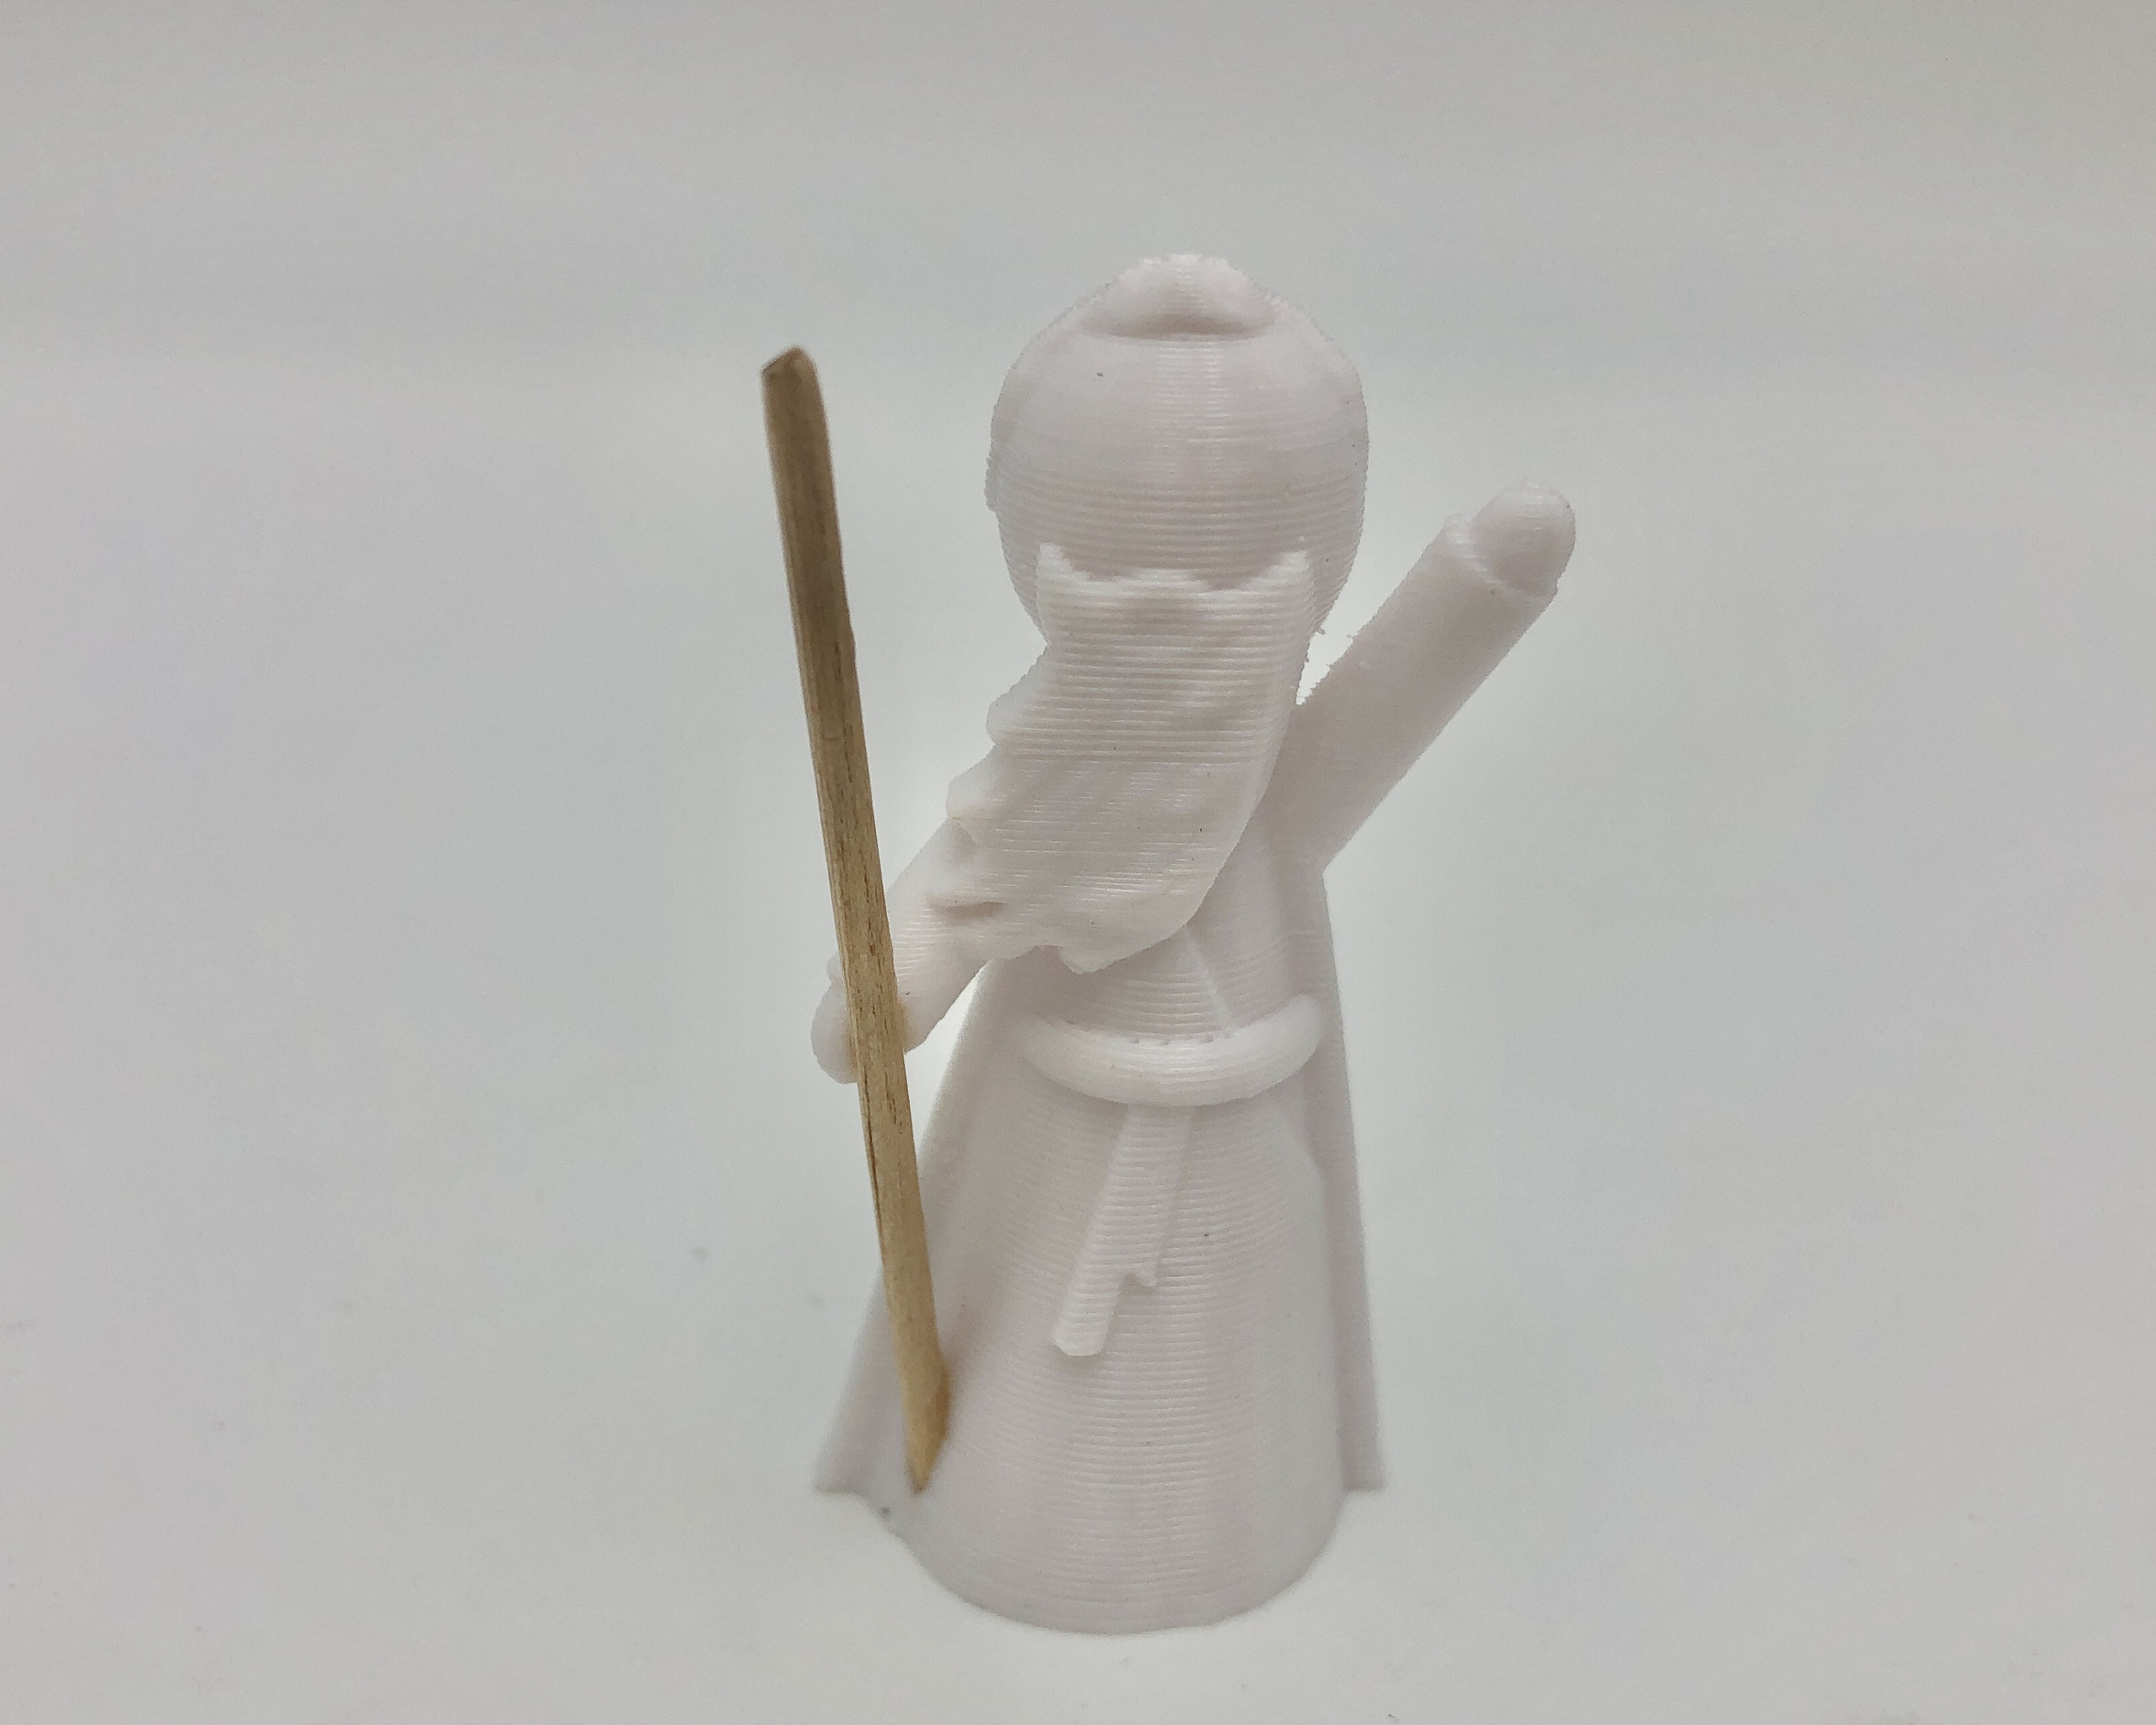 Paintable Peg Doll Moses Figurines. Let My People Go Figurine and